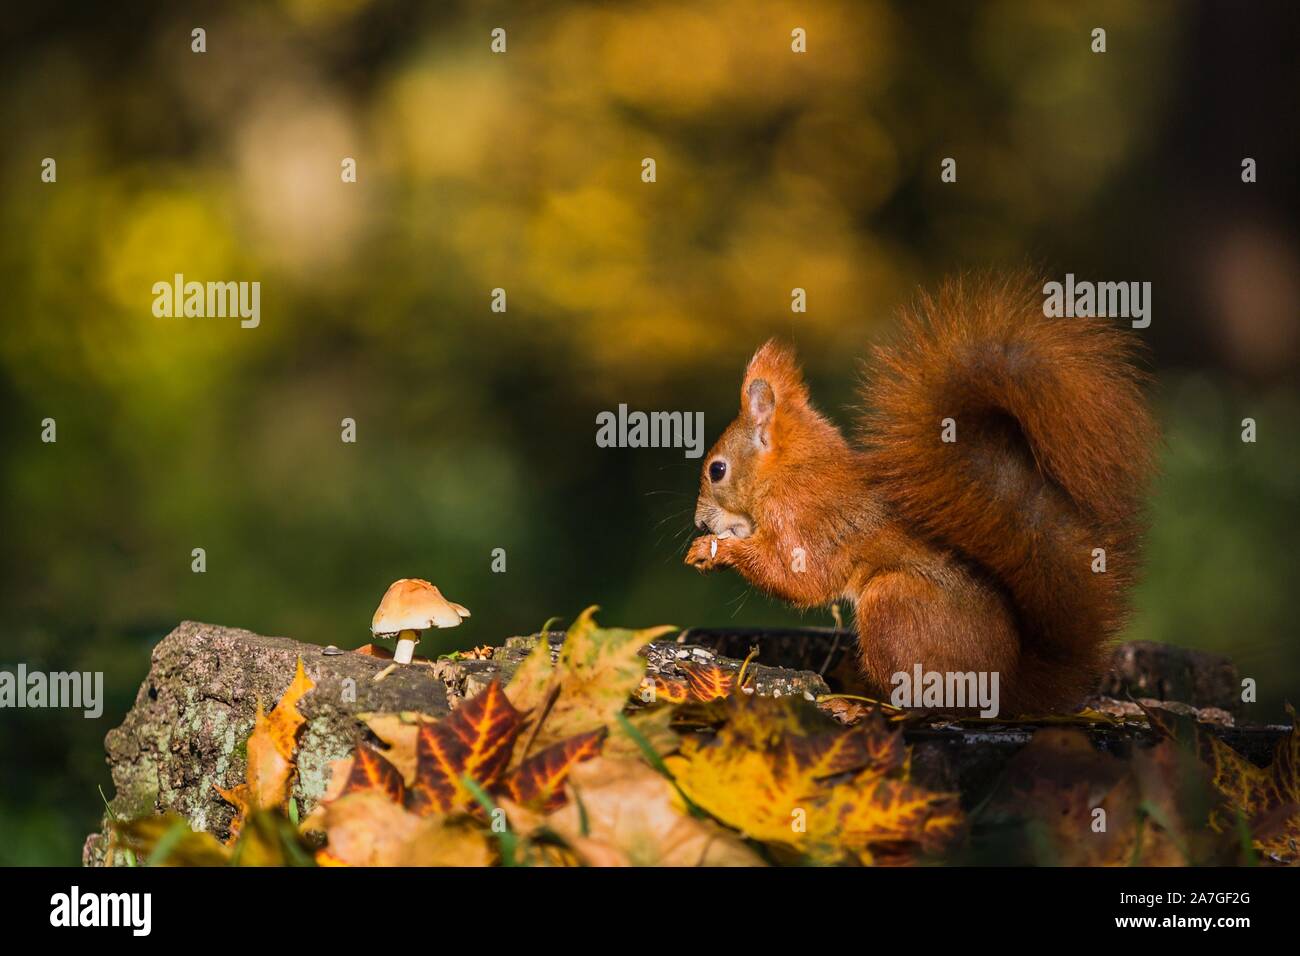 Portrait of red Eurasian squirrel with fluffy tail sitting on a tree stump covered with colorful leaves and a mushroom feeding on seeds. Sunny autumn. Stock Photo